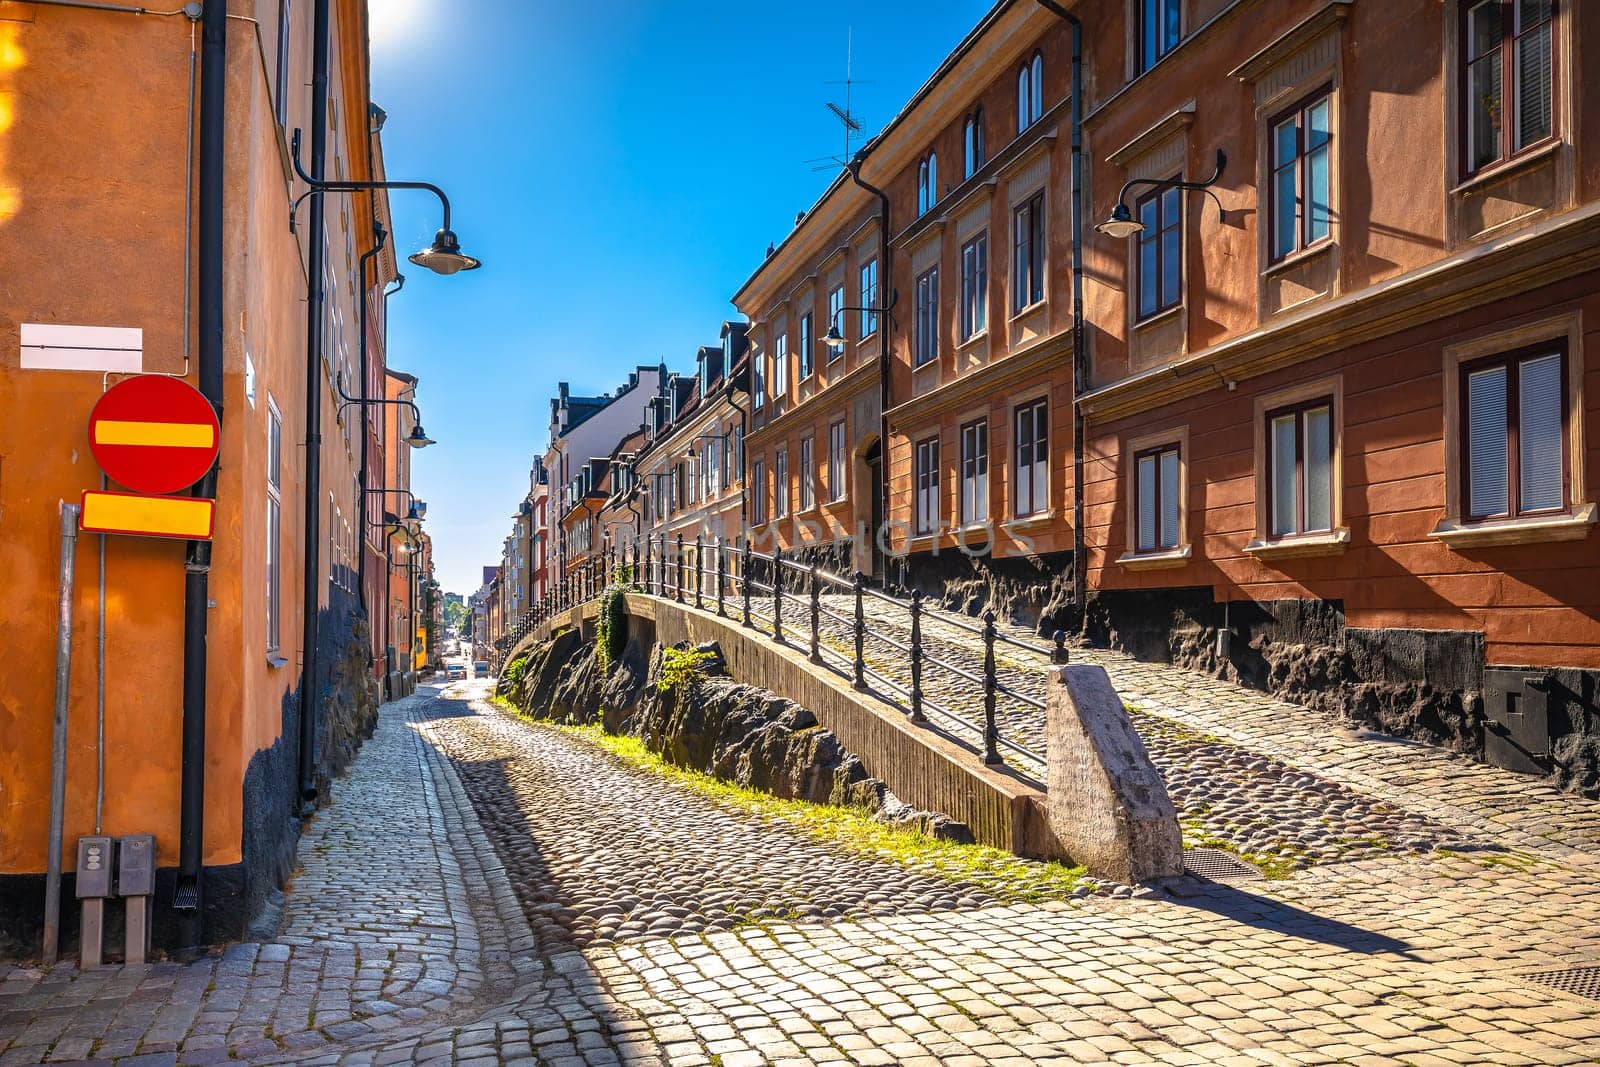 Stockholm Södermalm island scenic street view, capital of Sweden